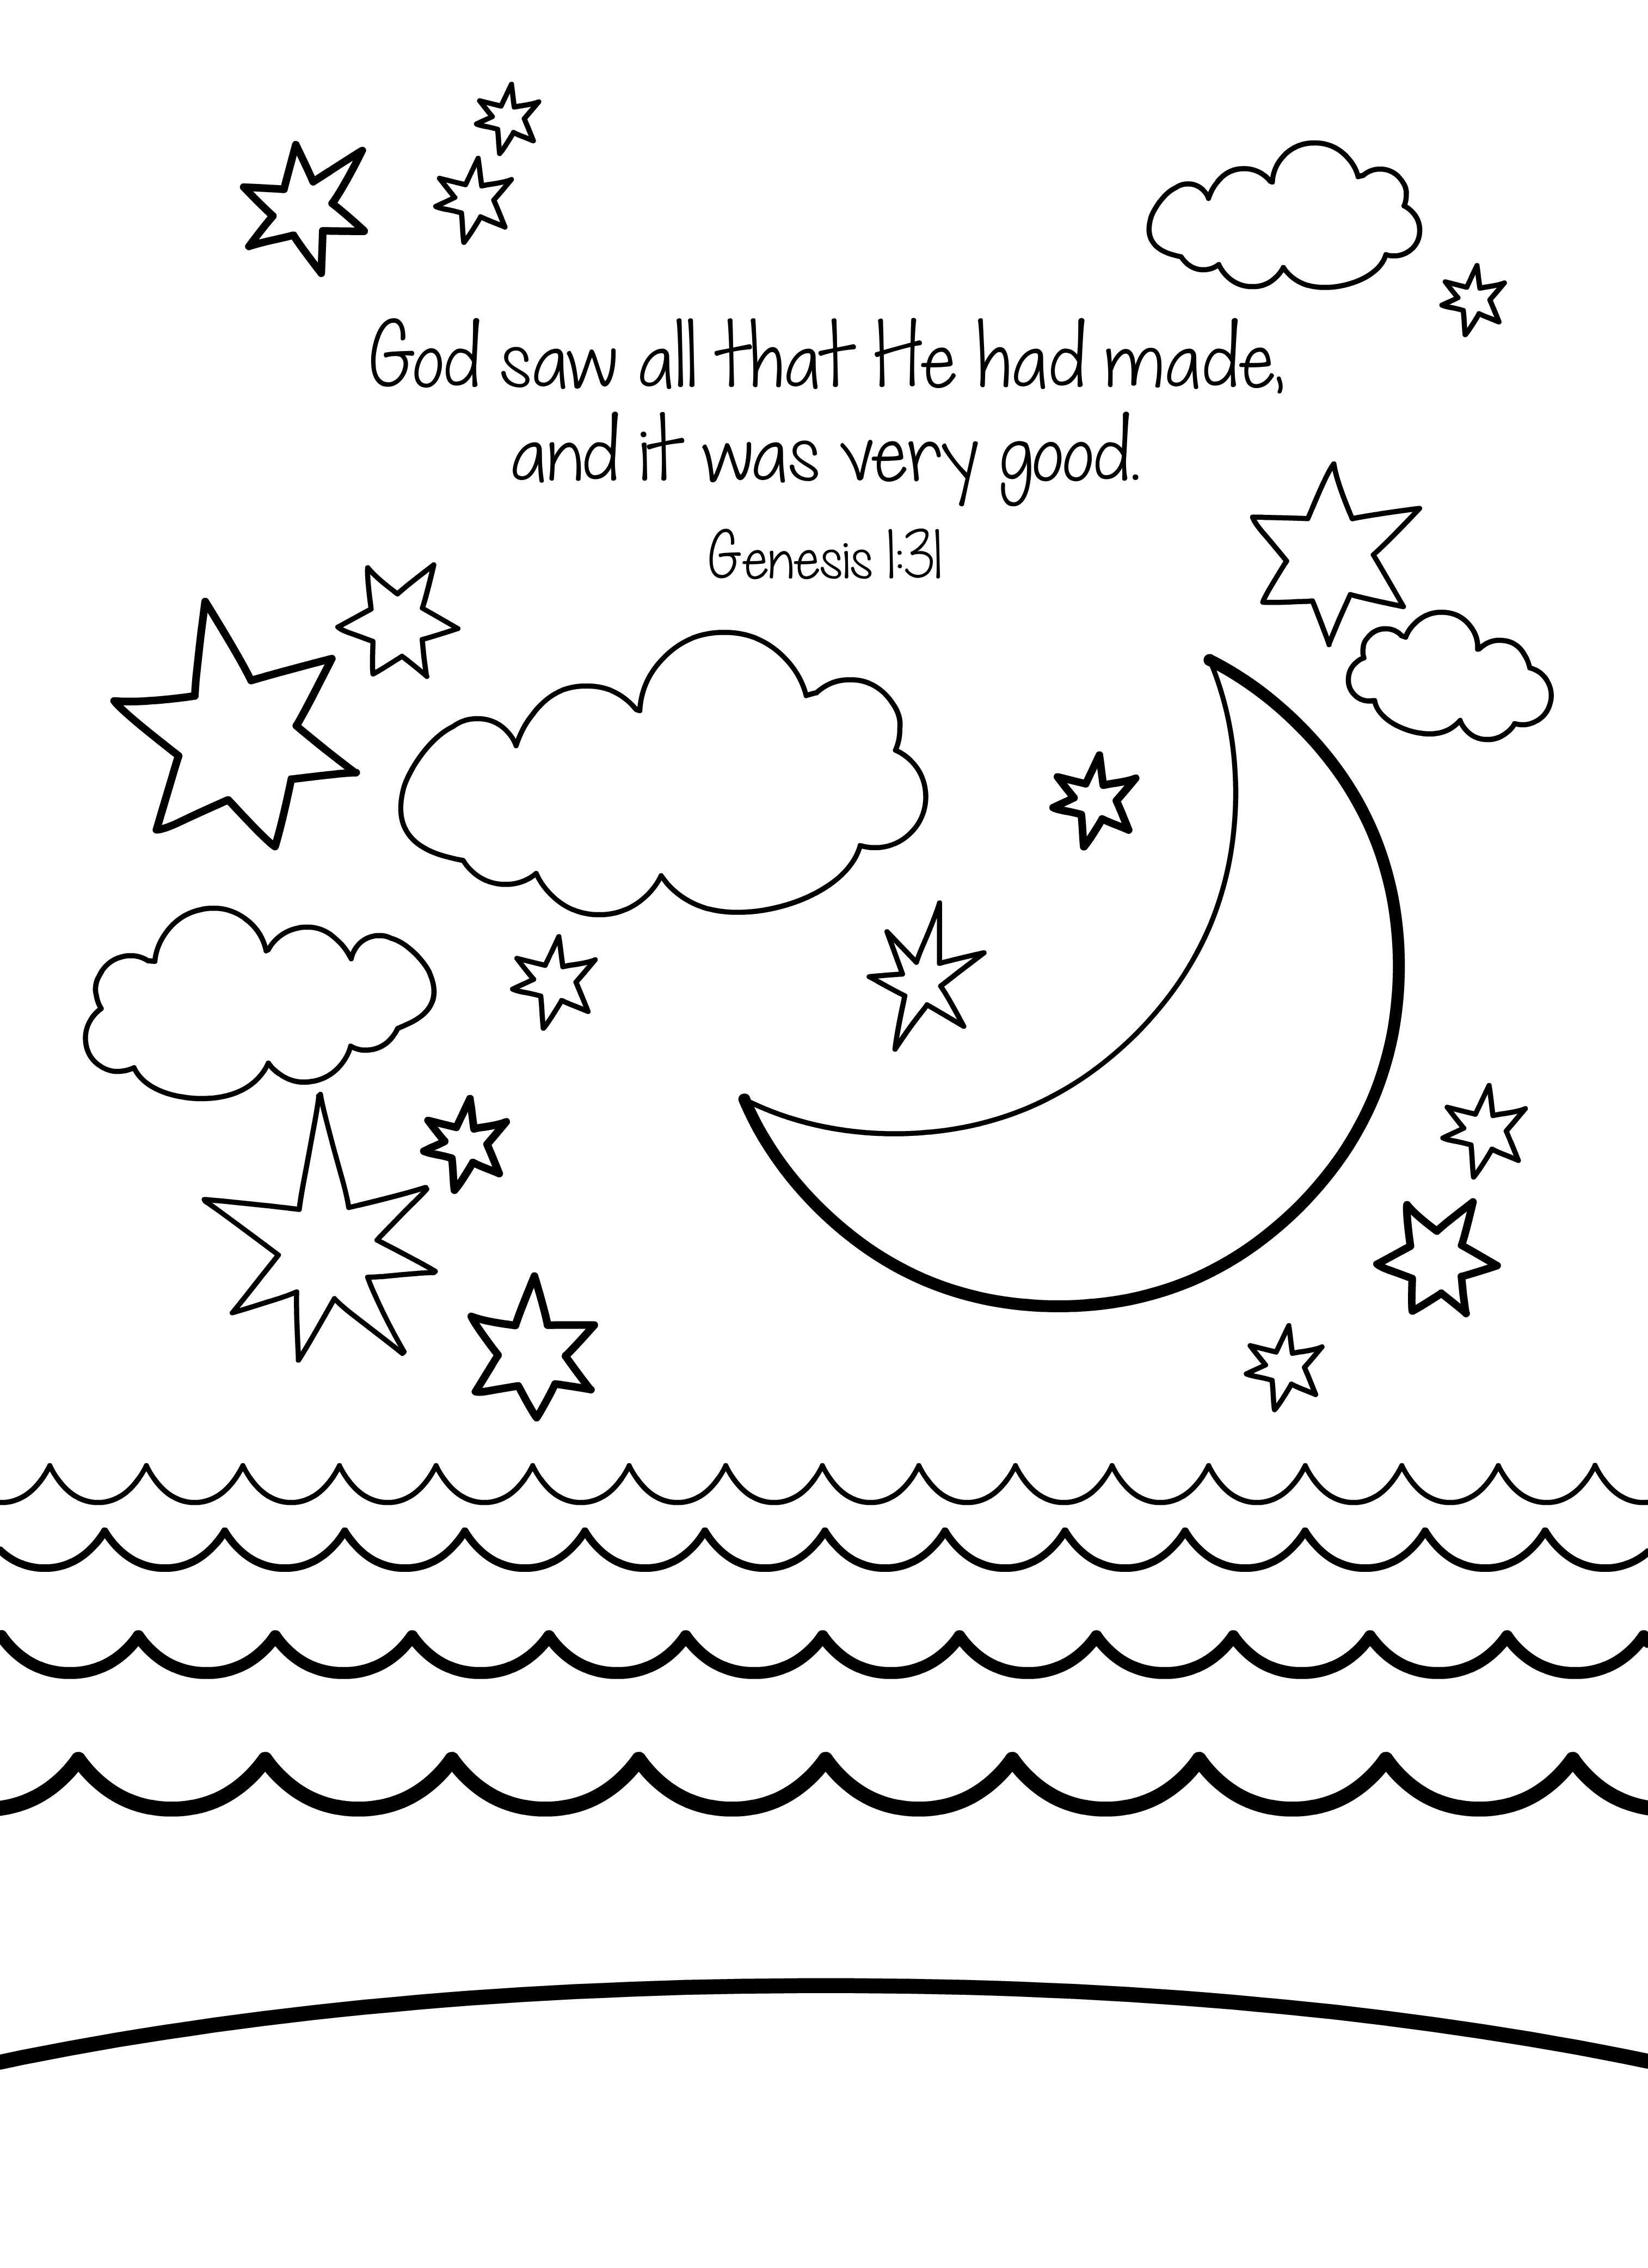 Cold Weather Clothes Coloring Page - Coloring Pages For All Ages